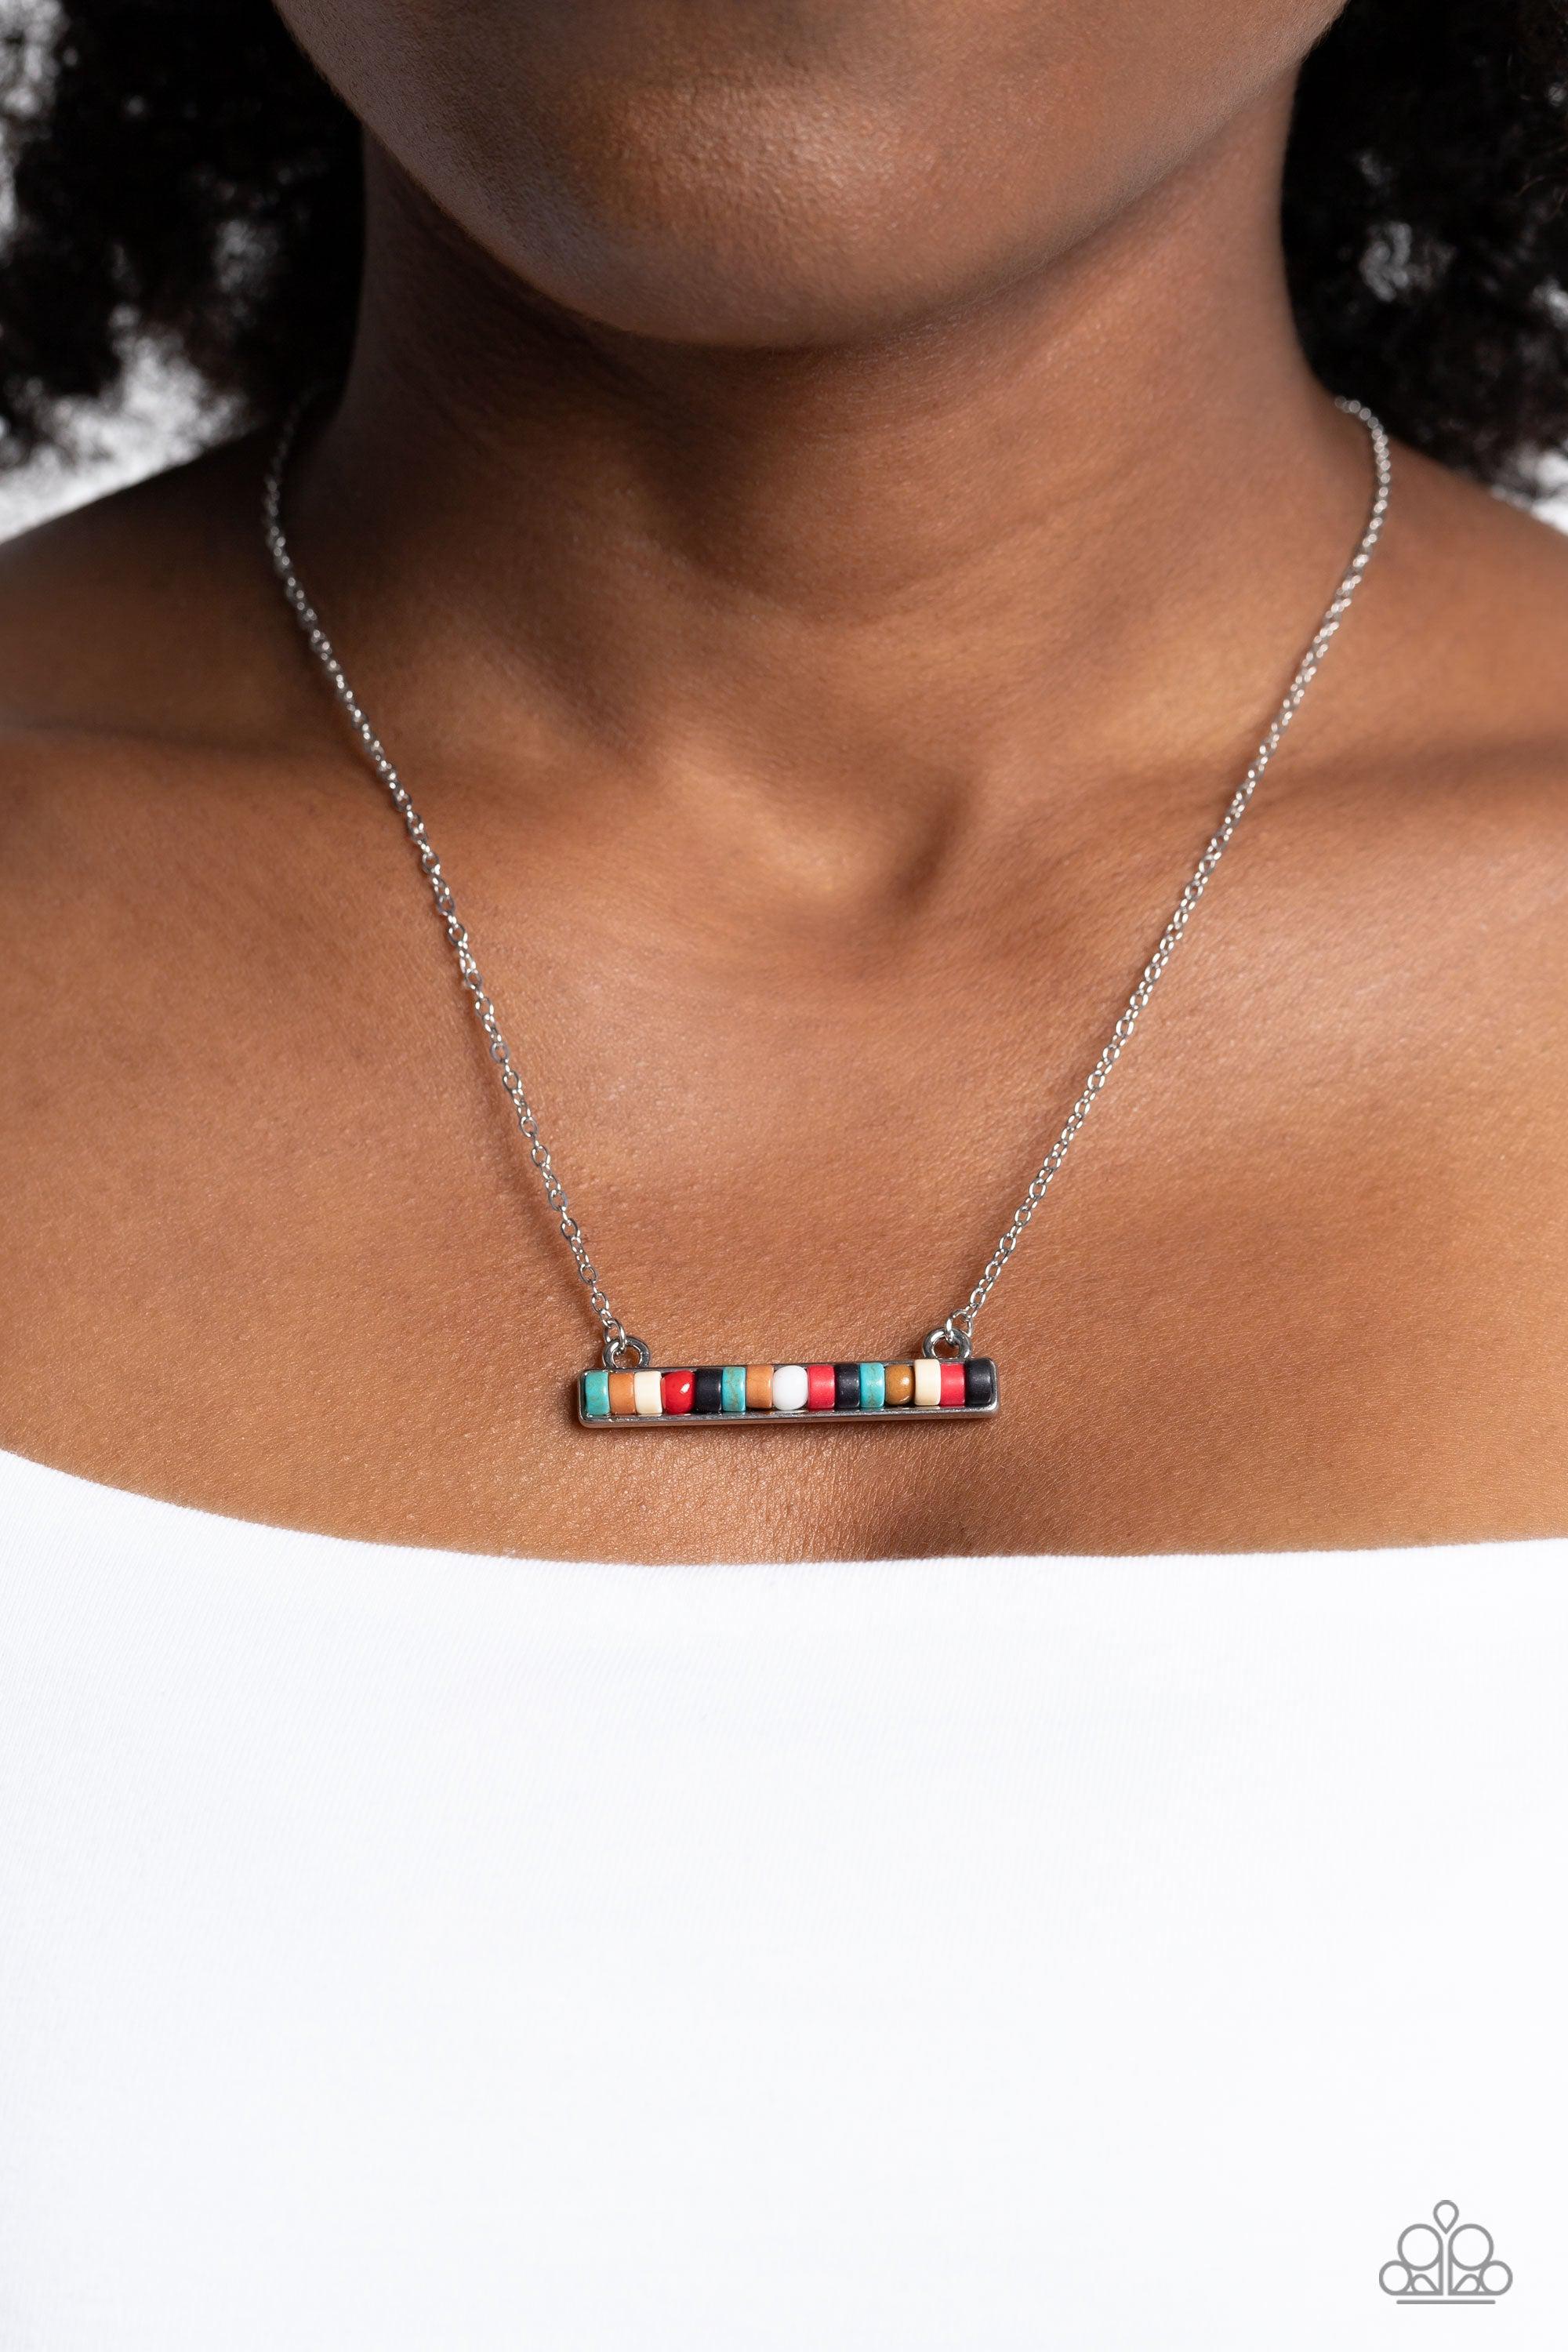 Barred Bohemian Multi Necklace - Paparazzi Accessories- lightbox - CarasShop.com - $5 Jewelry by Cara Jewels